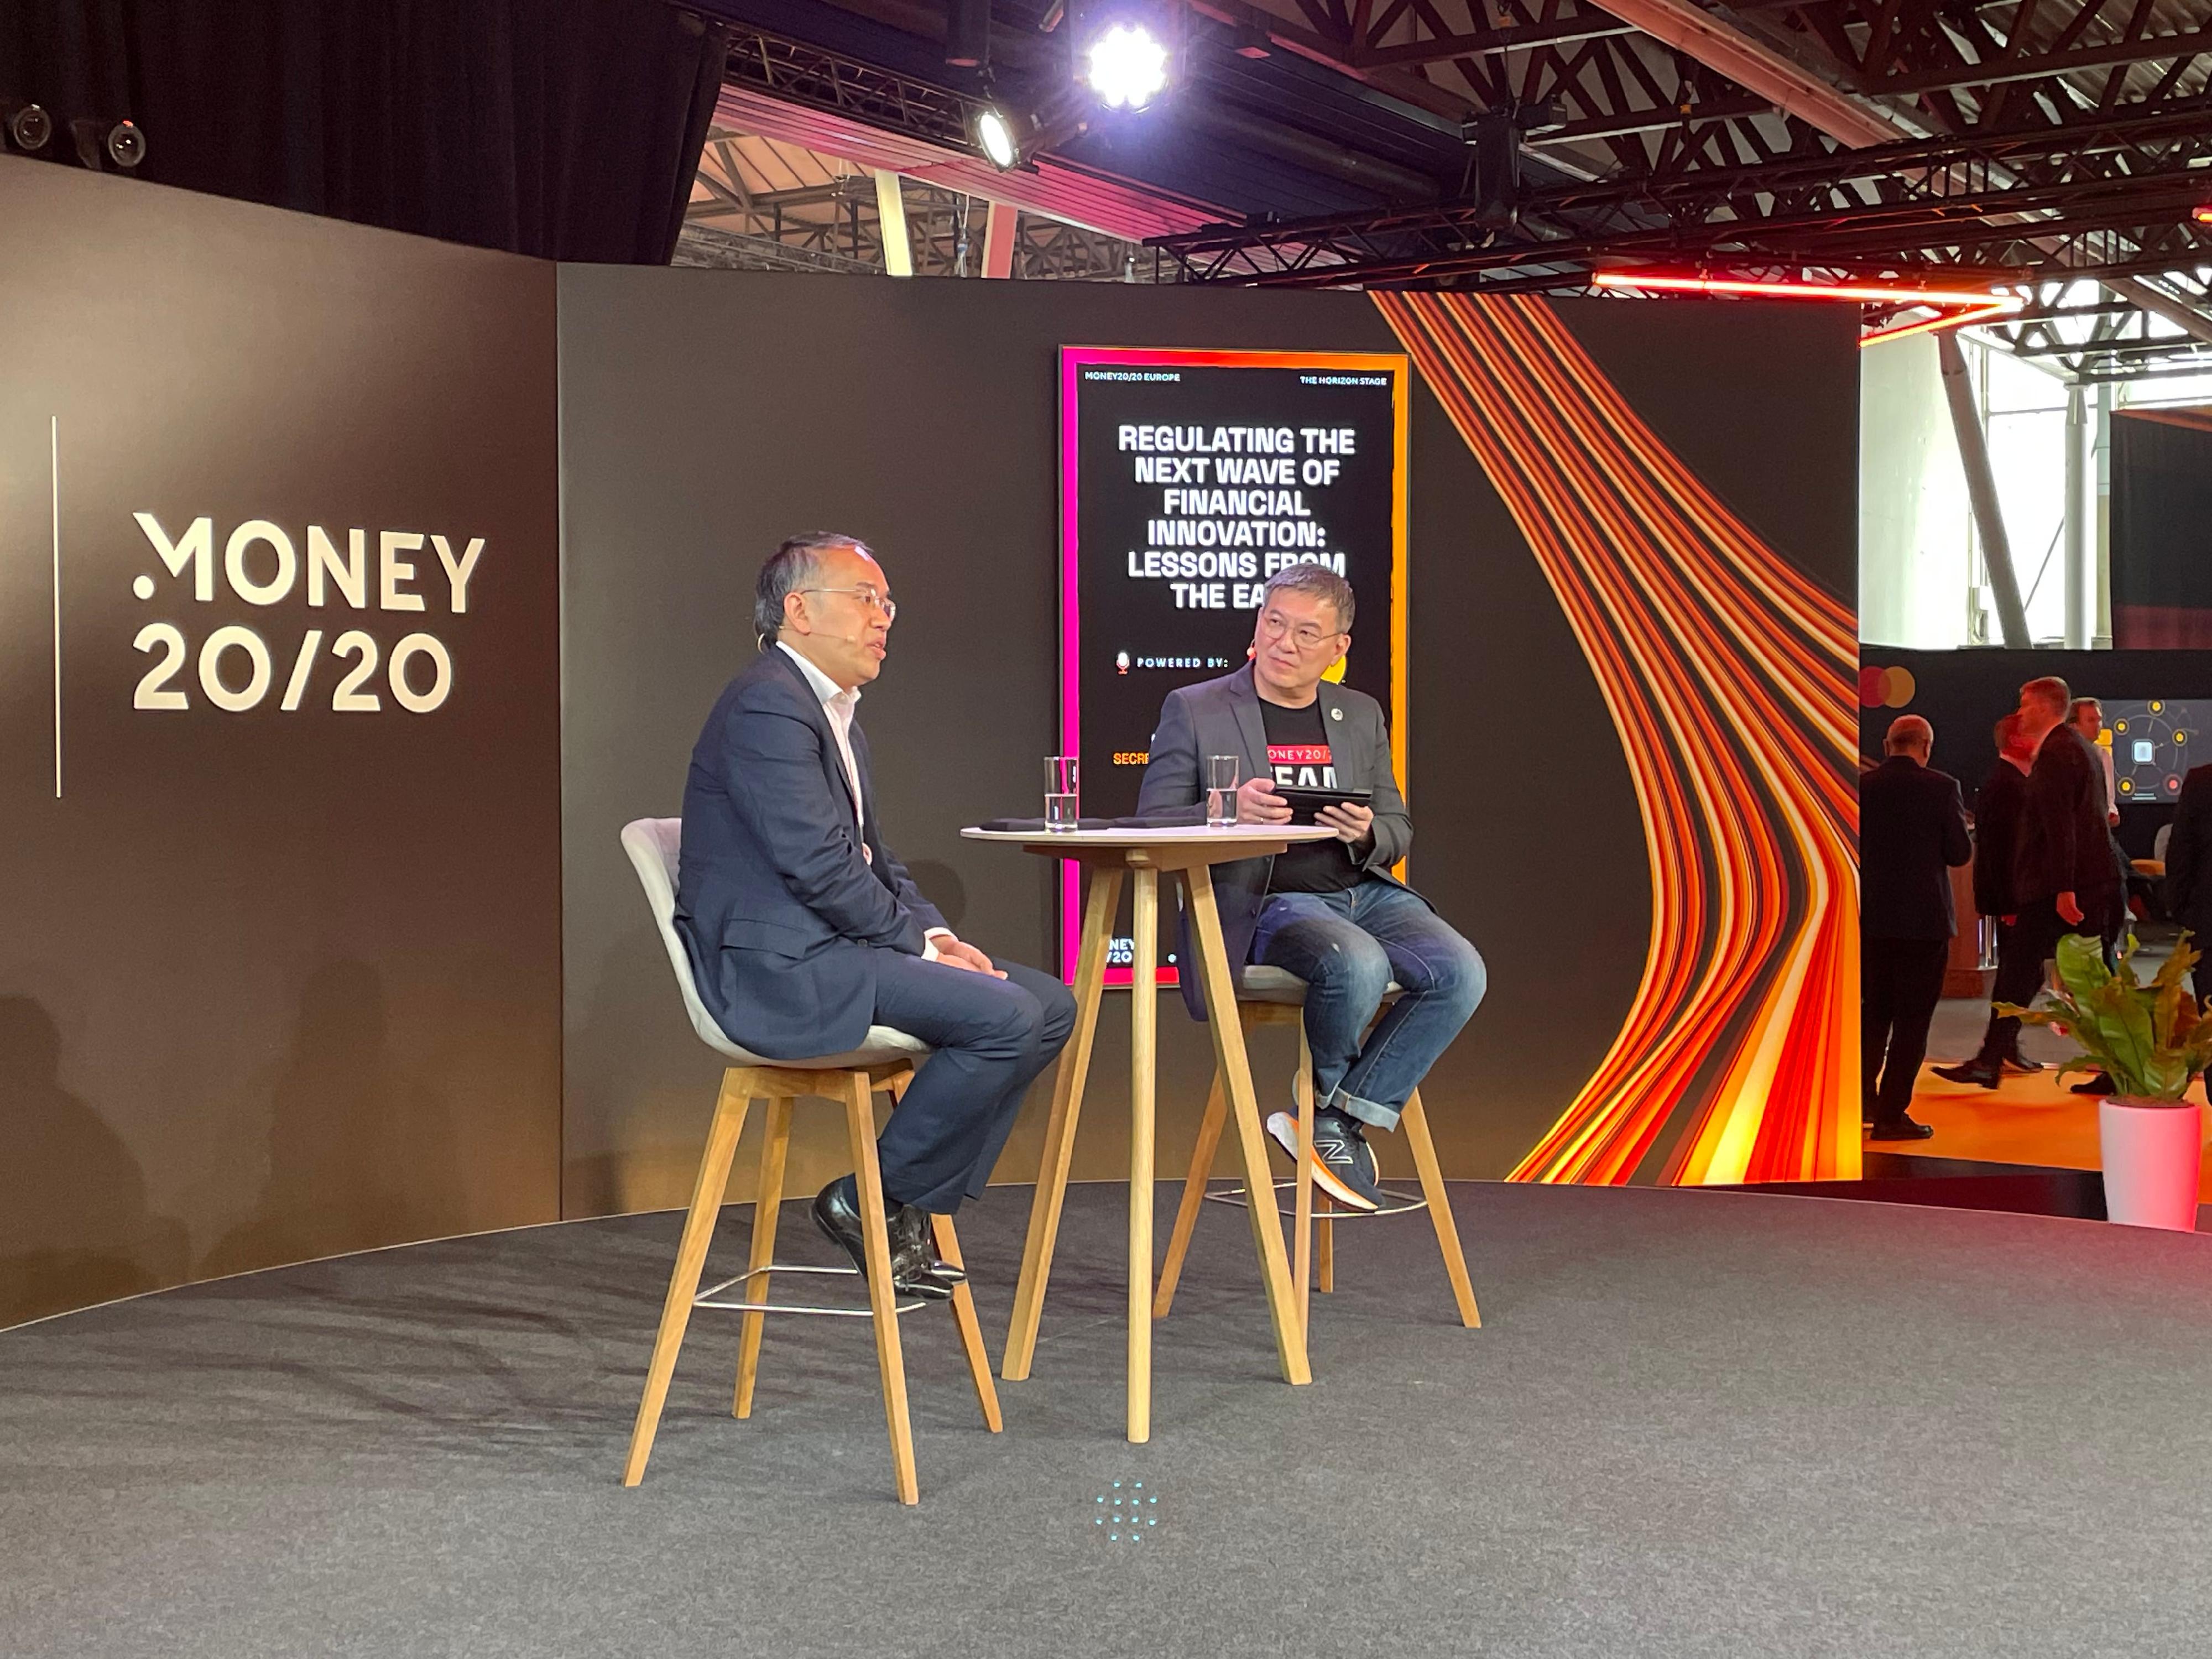 The Secretary for Financial Services and the Treasury, Mr Christopher Hui, is promoting Hong Kong's Web3 ecosystem and meeting senior financial officials in the Netherlands. Photo shows Mr Hui (left) participating in the fireside chat of the Money 20/20 Europe in Amsterdam on June 4 (Amsterdam time).